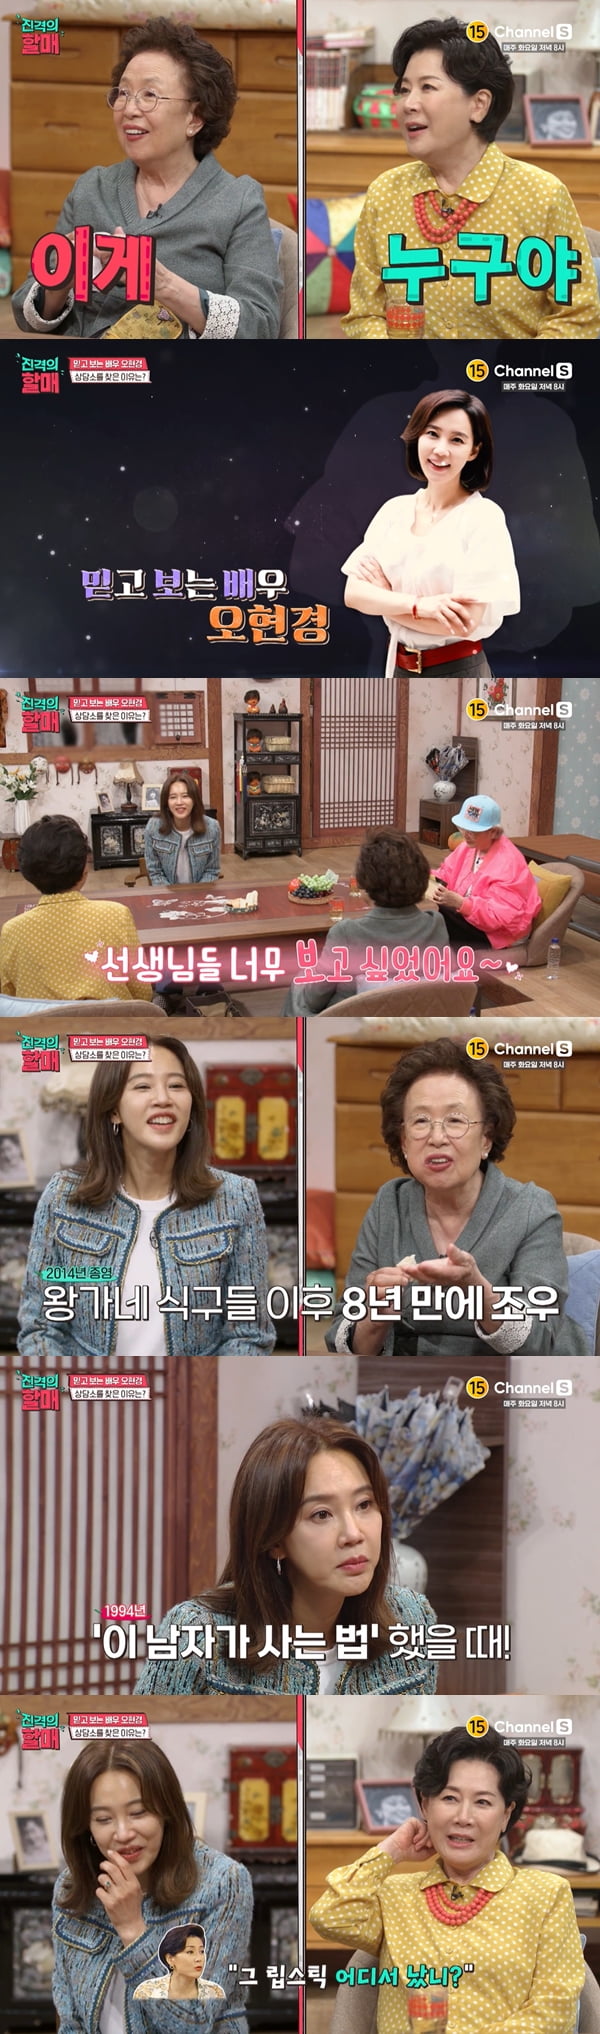 Actor Oh Hyon-kyoung has revealed he has not weighed 50kg for the first time since Middle School.In the channel S entertainment Attack on Titans grandmother broadcasted on the 26th, Oh Hyon-kyung was shown to consult the grandmothers about their troubles.On the show, Oh Hyon-kyoung appeared with his own cheers; he bowed, saying, You have to say hello.Na Moon-hee expressed gratitude for I ate the rice cake I gave you last time. Oh Hyon-kyung handed out rice cake to three grandmothers.Na Moon-hee and Oh Hyon-kyung reunited after eight years after the Drama Wanganese family.Park Jung-soo and Oh Hyon-kyung were breathing in Drama How This Man Lives 24 years ago.Oh Hyon-kyung said,  (Park Jung-soo) was interested in me applying lipstick, when I was young, I just said, Where did you get that?He said, I laughed.Kim Young-ok and Oh Hyon-kyung have been breathing as mother and daughter in the recent drama Gentleman and Lady.My big sister told me a lot about you, there was a Savoie sprout, Park Jung-soo said, laughing.Kim Young-ok expressed affection for I did not have such a child because I was a daughter, but everything.Na Moon-hee also added, It hasnt changed, its such a kid, its nice. Kim Young-ok said, Its a bad man that cant be explained.Na Moon-hee asked, What trouble have you come for? Oh Hyon-kyung said, Always Miss Korea follows.I accept it now, but sometimes it is not easy to weigh it. Do you have to live up to it? Oh Hyon-kyoung said, Whatever you do, its Miss Korea, you have to put this down, you have to keep holding it.Park Jung-soo said, I thought there would be an agony of actor Oh Hyon-kyoung, not Miss Korea Oh Hyon-kyoung.I didnt even think so, said Oh Hyon-kyung, who said when the article still goes, its got the Miss Korea title.Im upset, you cant get rid of it, you follow it until you die, said Park Jung-soo, who said, Youll be sorry if its gone?Oh Hyon-kyong said: Thank you, even if you do a lot of activities, there are many people who say, Where did you come from? Thank you for being imprinted.But it seems that there are many people who can not get out of there when they take the role.Na Moon-hee said, Oh Hyon-kyung did not do well as a good actor in Miss Korea.Oh Hyon-kyung said: Im glad teachers have looked at me like that, I think I lack my acting, I swear, I have a desire for a character.When a good friend spits a word, the actors aura comes out. When I saw it, I thought why not. Oh Hyon-kyung said: My sister (Kim Seong-ryeong) is three years older than me, but shes Miss Korea, ahead of me, her sister is coming well, so shes subject to comparison.I have been working with a model since high school, he said. There are people who are as cool as an actor. I am not that good.Oh Hyo-kyoung also said, It was so difficult in Gentleman and Girl. I was with Lee Il-hwa and Lee Jong-won at the last minute, but it was so difficult.The tangled relationship was not settled, but the grandmothers praised him for doing well.Park Jung-soo said, You were married, you had a child, and you got older and came out well.Oh Hyon-kyung said, If you do, you still say its increased, I think its going to have depth. Suddenly Kim Young-ok said, He was Savoie sick.Oh Hyon-kyung was injured in ribs during filming but played with a sore note; Oh Hyon-kyung said: Its my fault that I was hurt, and Drama has to broadcast this week.I cant breathe. I still cry. I was hurt, but I couldnt talk. I thought I was really dying.Youre careful where youre going now, you shouldnt break me, so you always try to keep it, Park Jung-soo said.Oh Hyon-kyung said: Our job is that Im sick, its a bad thing, Im sick, Im sick, and Kim Young-ok said, Do you still care about your appearance because of Miss Korea (description)?I asked: Youre on a diet though your body is? Park Jung-soo helped.Oh Hyon-kyung said: You have to wear clothes that fit your role rather than a diet, and those clothes come out in basic sample sizes, and Im a little bit fit because Im built and I dont fit.If the clothes do not fit, it becomes uncomfortable when acting and loses confidence. Oh Hyon-kyoung said, Management is about 10 hours in the car on our side and we can not eat rice. As I get older, I think I endure, but my body gets sick.I shouldnt have had a basic stamina, he said.Park Jung-soo said, If there is Miss Korea Oh Hyon-kyung, actor Oh Hyon-kyung, it is potentially not to be disturbed.Oh Hyon-kyung, who usually manages himself with Pilates and yoga, stretches in the middle of the shoot, even when he wakes up in bed.Youre a big hit now, youve been missing when youre doing Drama, said Kim Young-ok, who saw Oh Hyon-kyung, who personally introduced stretching.Oh Hyon-kyung said: (at the time of filming) it was less than 50kg, the first time since Middle School, theres still a flutter.I was surprised to say that I did not sleep because I was trying to do two things. 